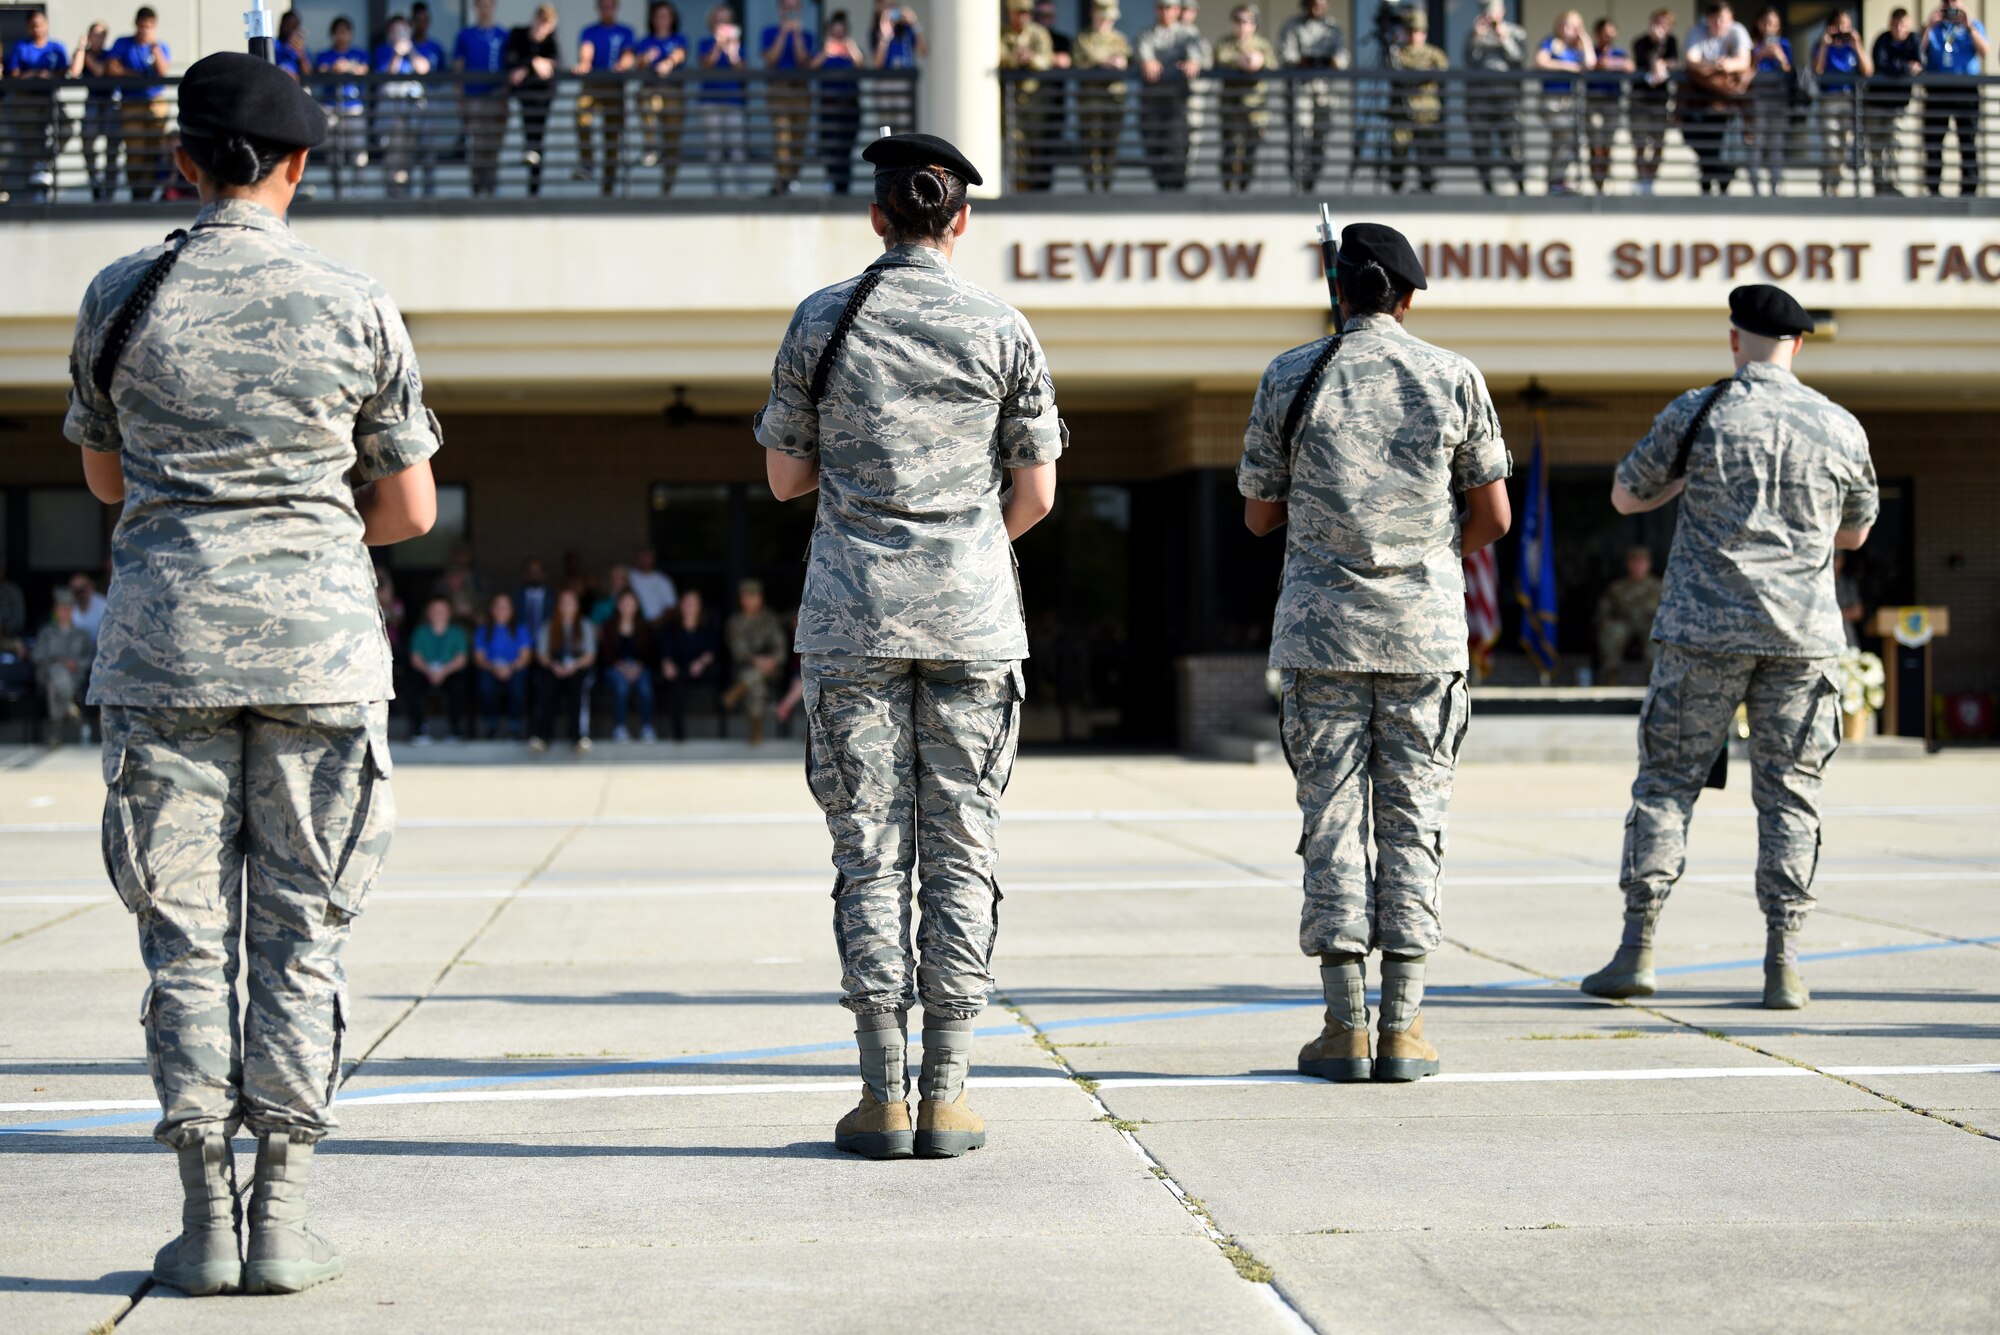 Members of the 334th Training Squadron freestyle drill team perform during the 81st Training Group drill down on the Levitow Training Support Facility drill pad at Keesler Air Force Base, Mississippi, Sept. 20, 2019. Airmen from the 81st TRG competed in a quarterly open ranks inspection, regulation drill routine and freestyle drill routine. While in training, Airmen are given the opportunity to volunteer to learn and execute drill down routines. (U.S. Air Force photo by Airman Seth Haddix)